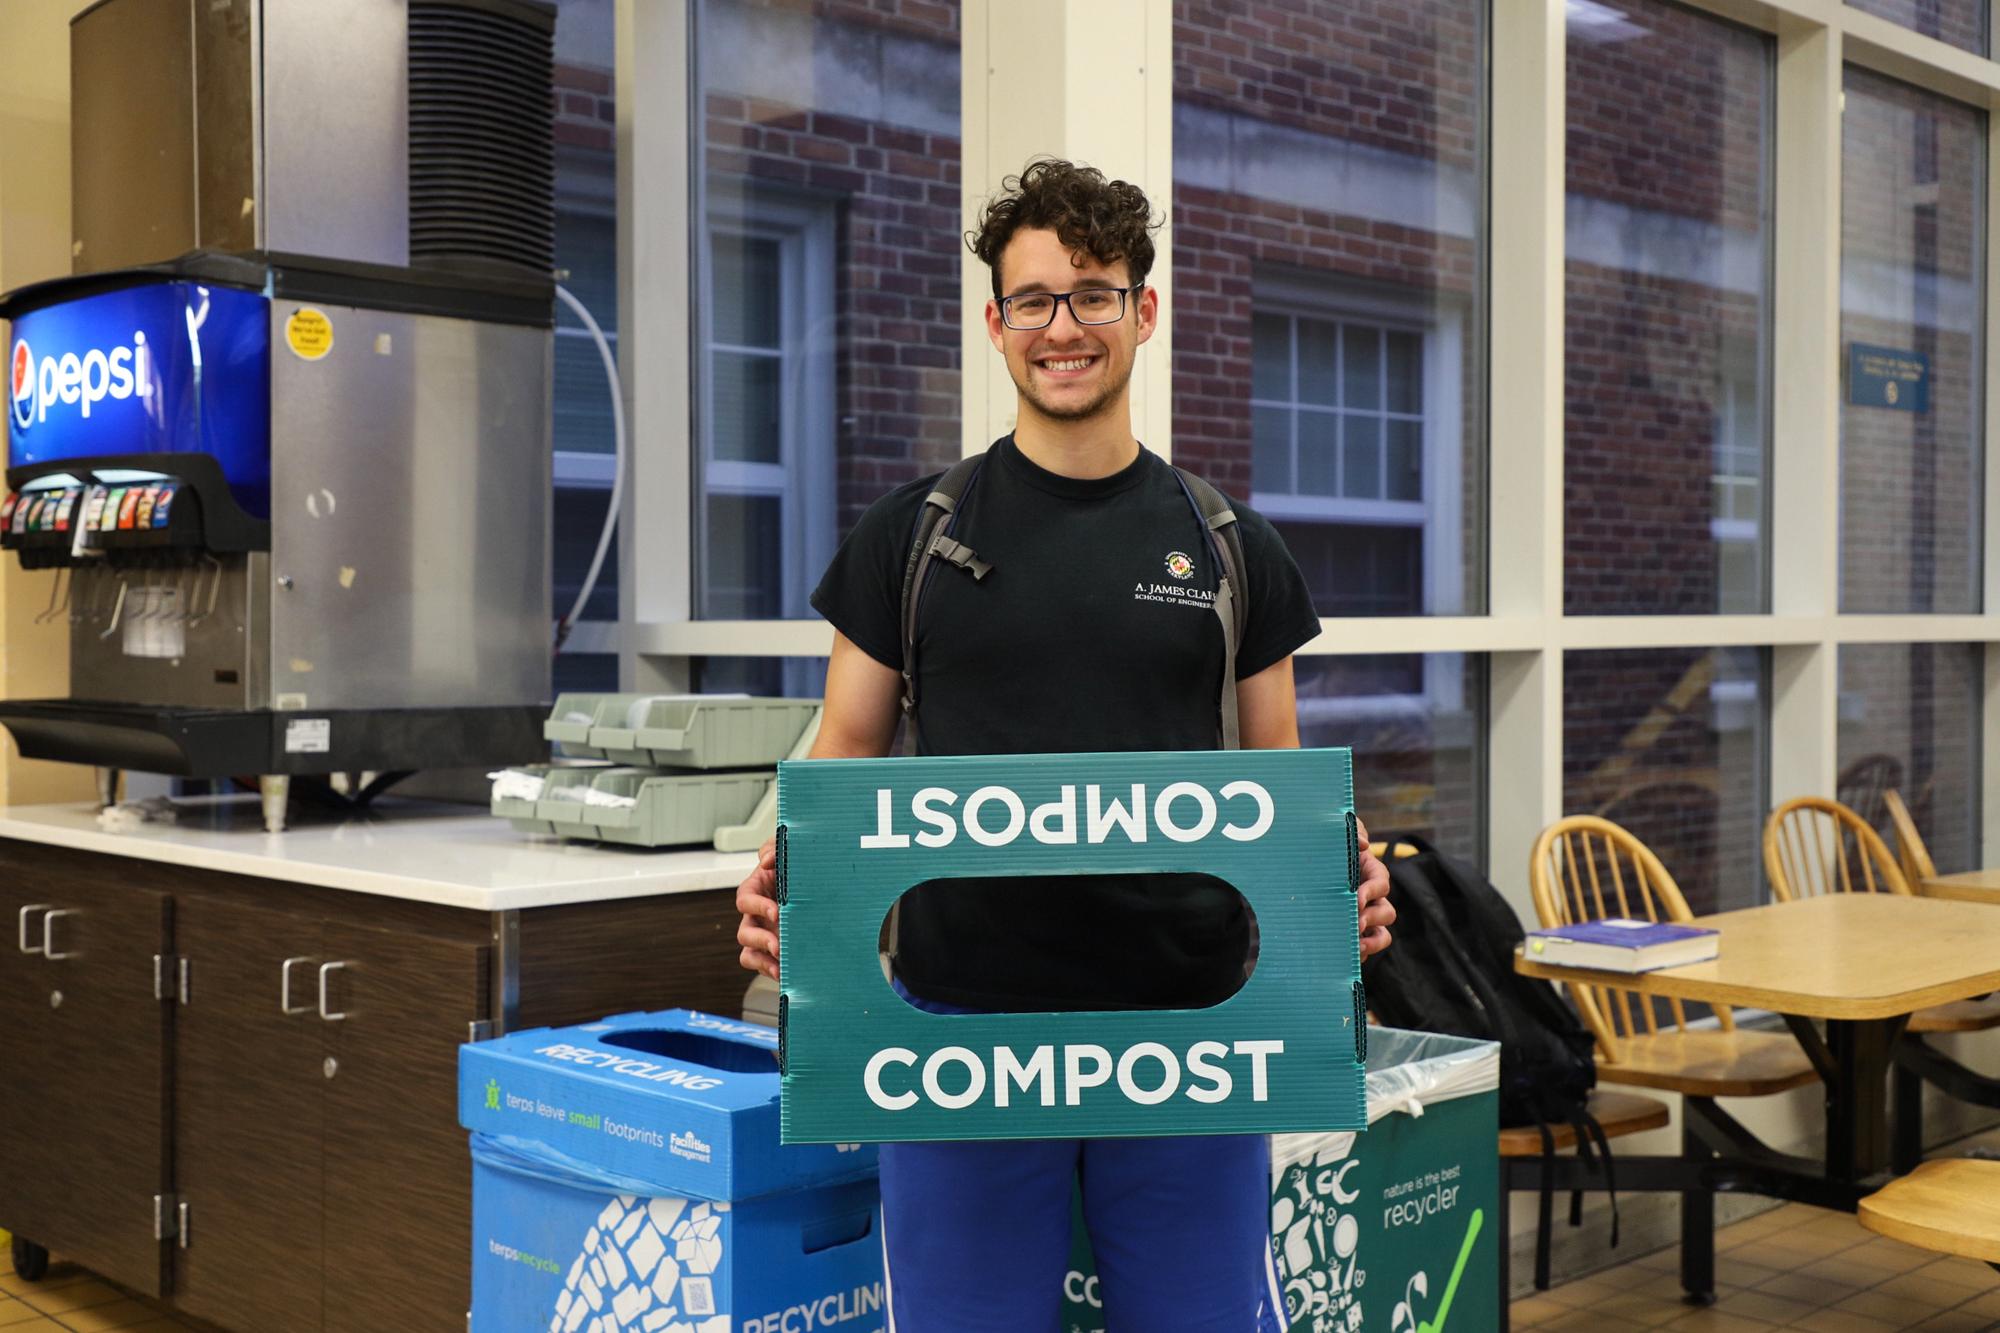 Student with Compost Collection Bin in Dining Hall